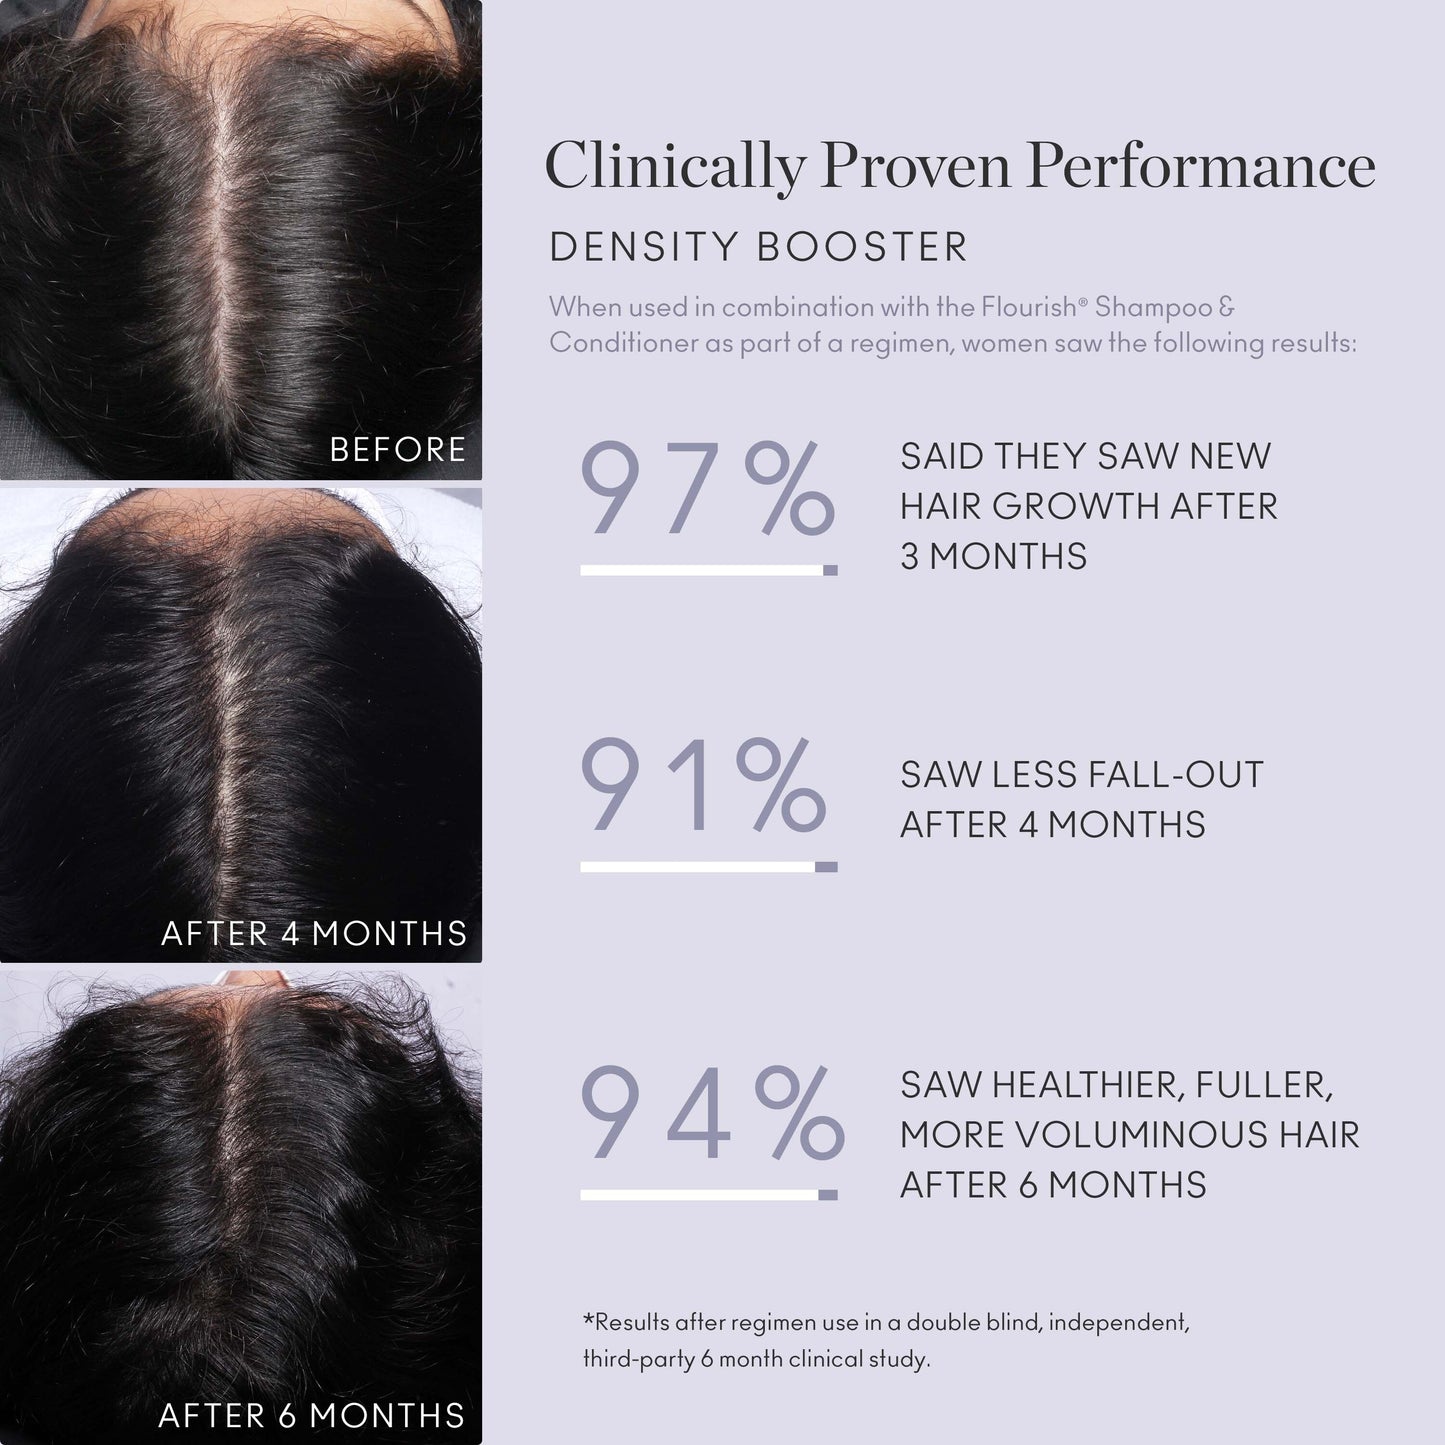 DENSITY BOOSTER Stimulates | Strengthens | Thickens